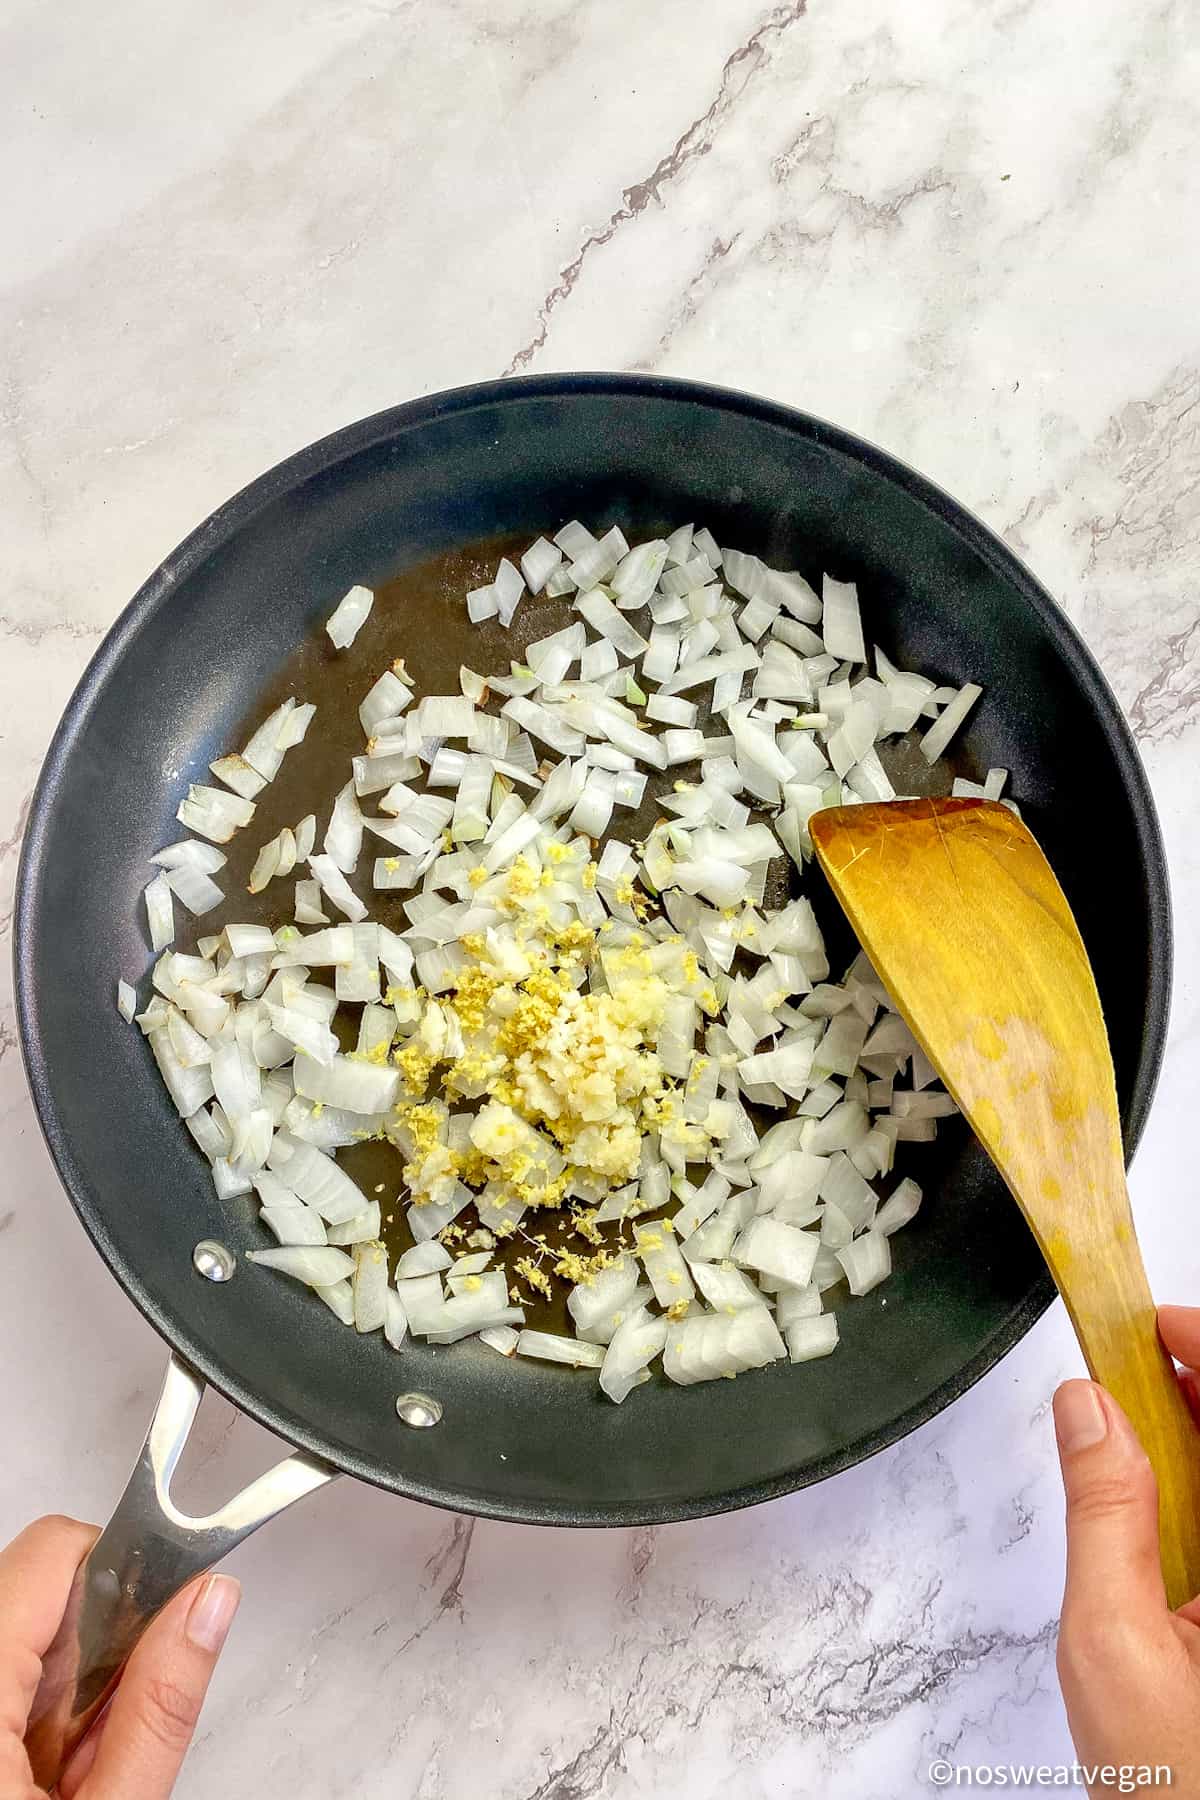 Diced onions, garlic, and ginger in a skillet.